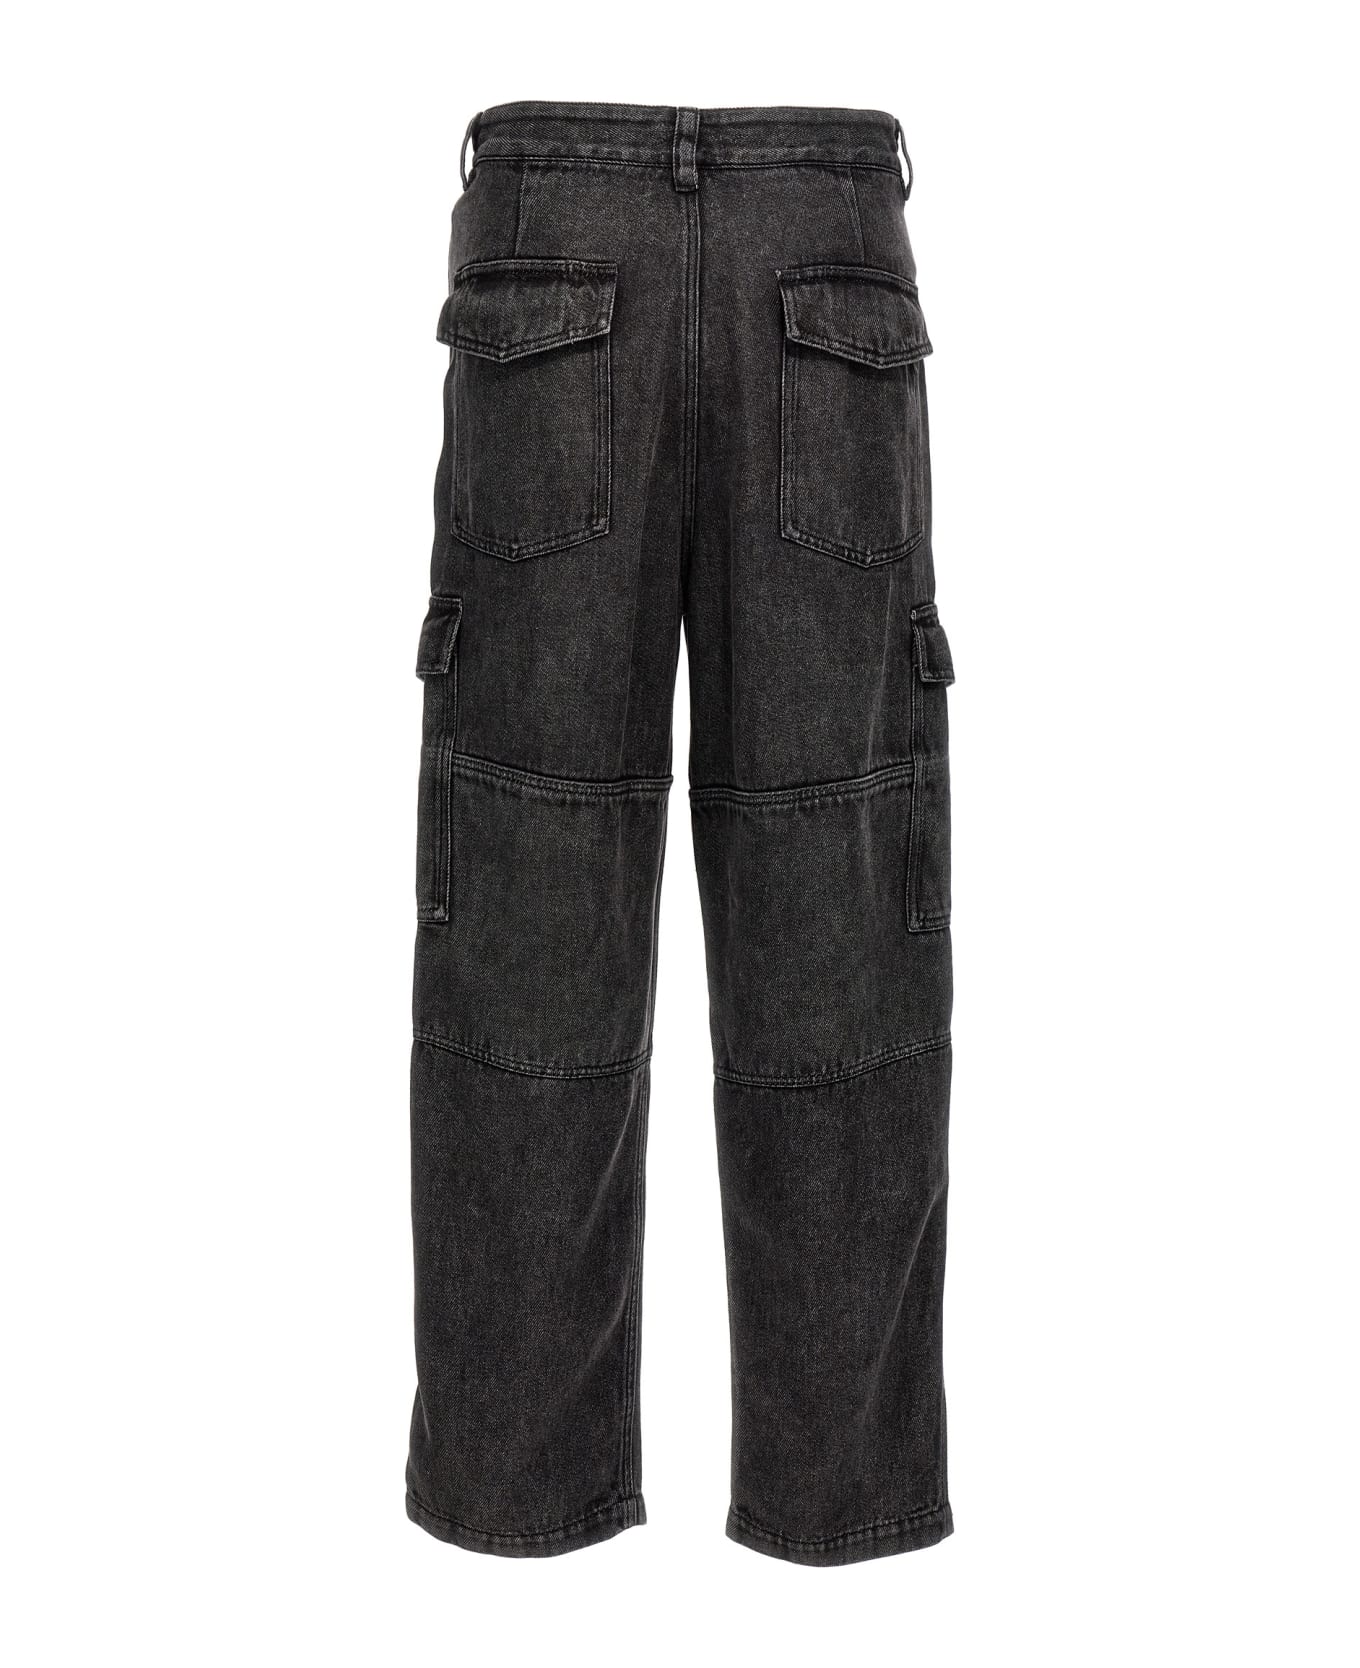 Isabel Marant Terence Cargo Jeans - Gray